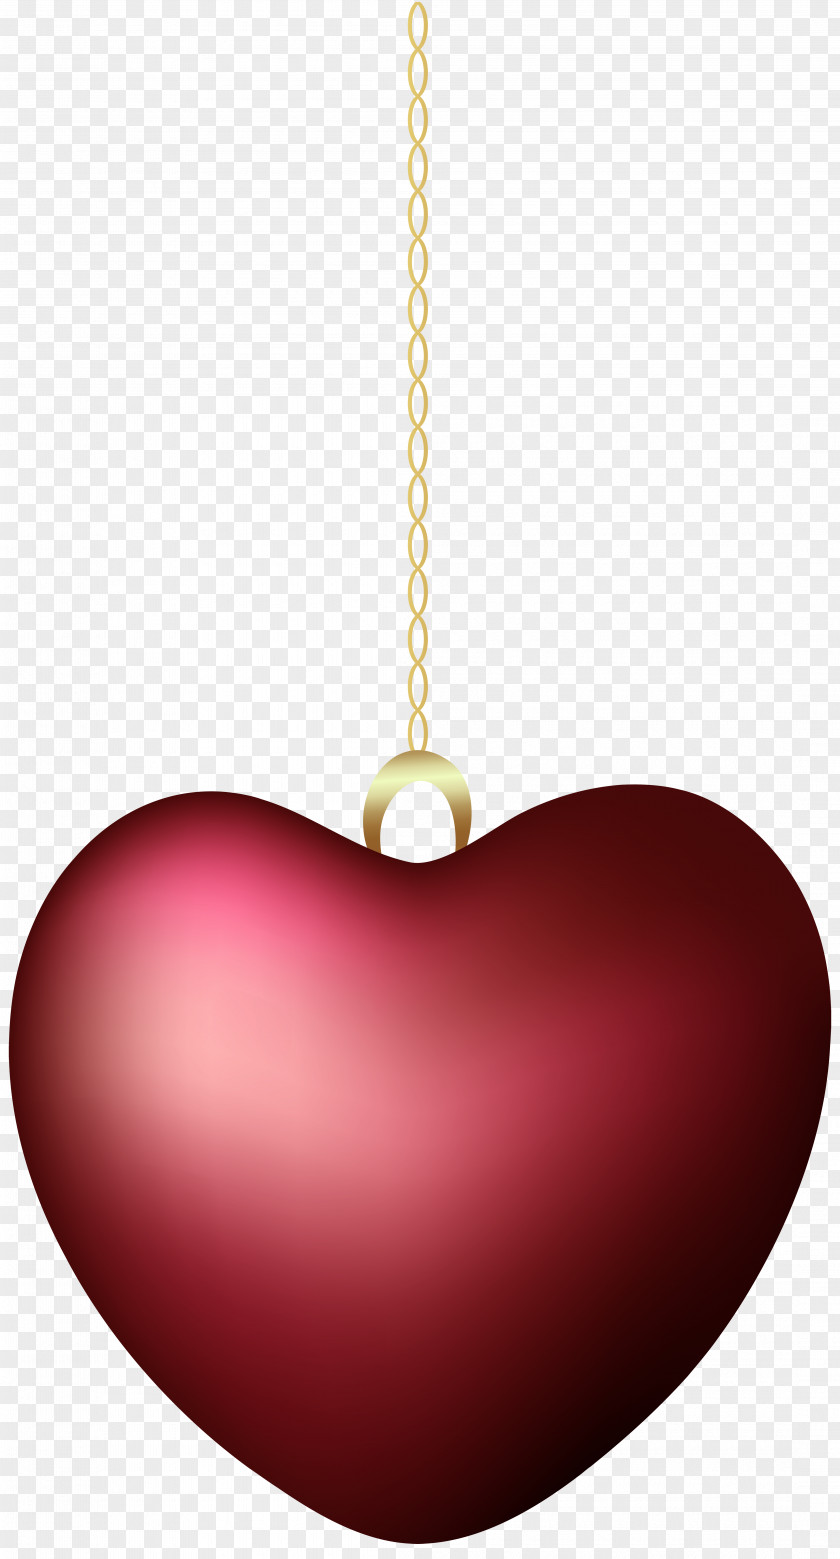 Red Hanging Heart Clip Art Image Christmas Ornament Maroon Design PNG